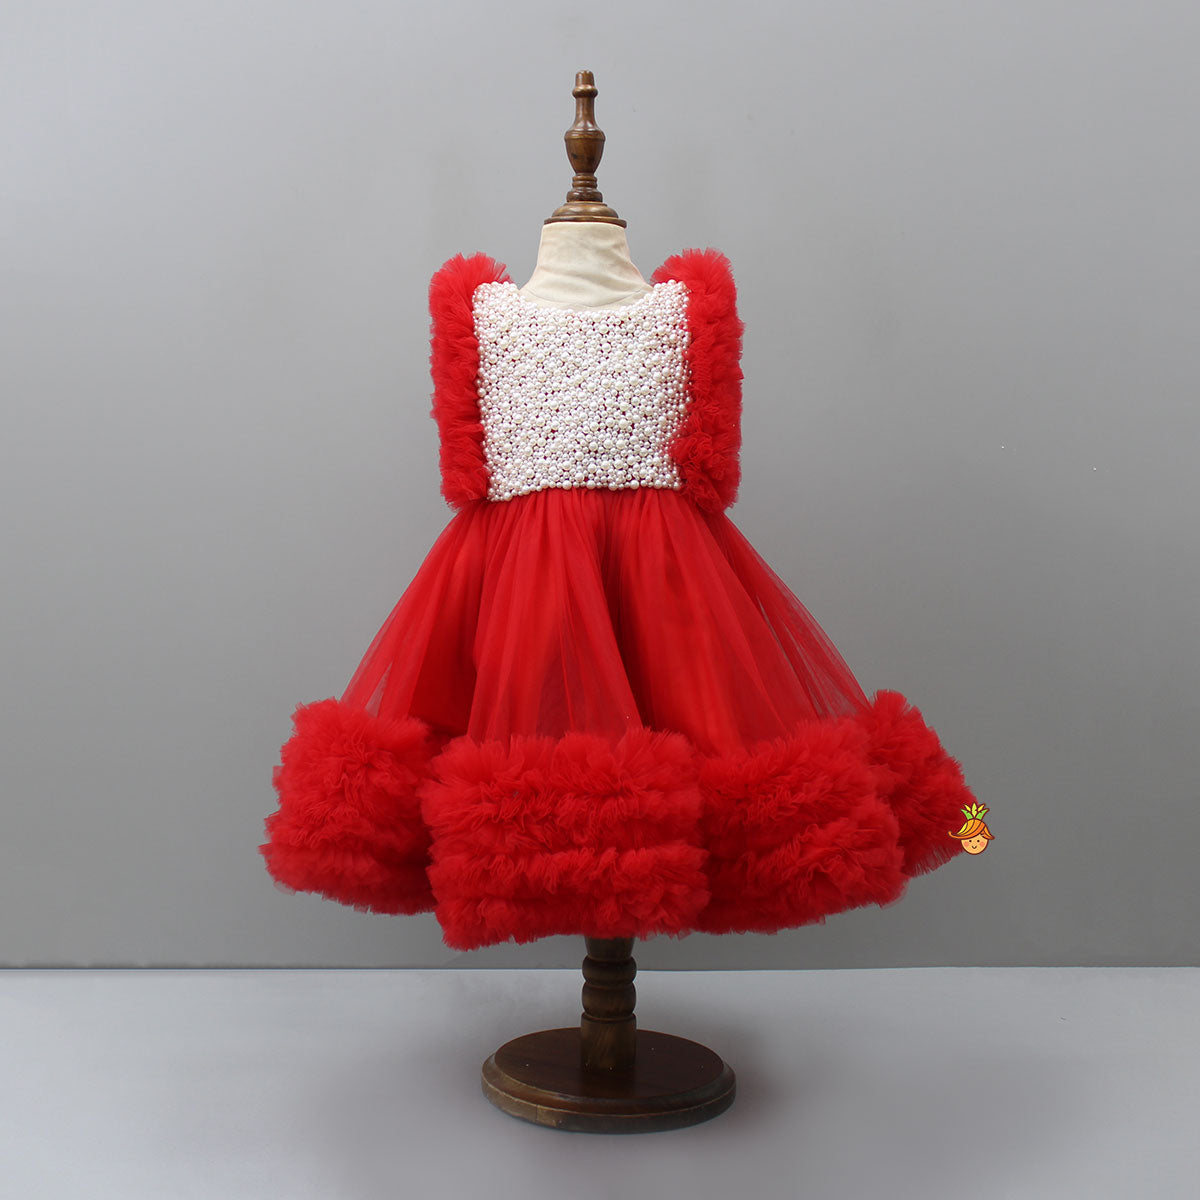 Pre Order: Glamorous Red Frilled Dress With Detachable Trail And Head Band